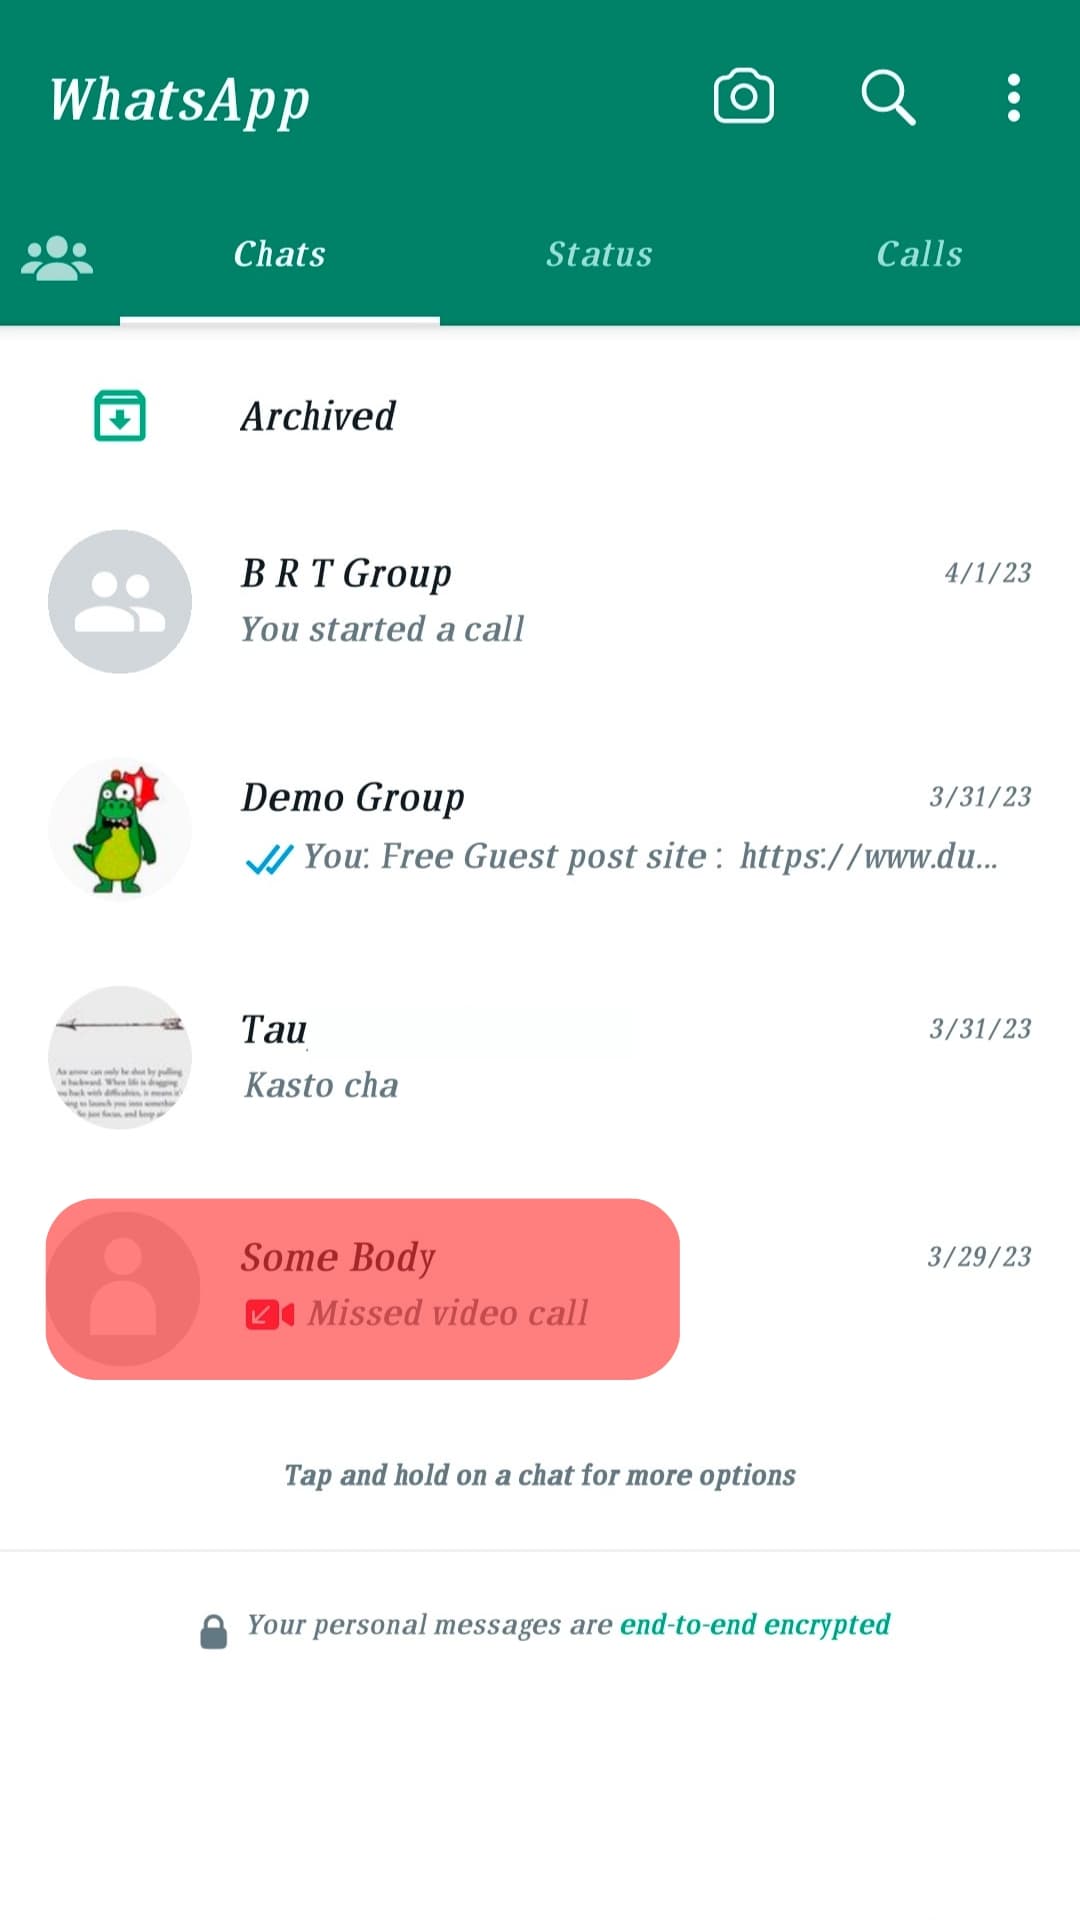 Navigate To The Chat Of The Whatsapp Number